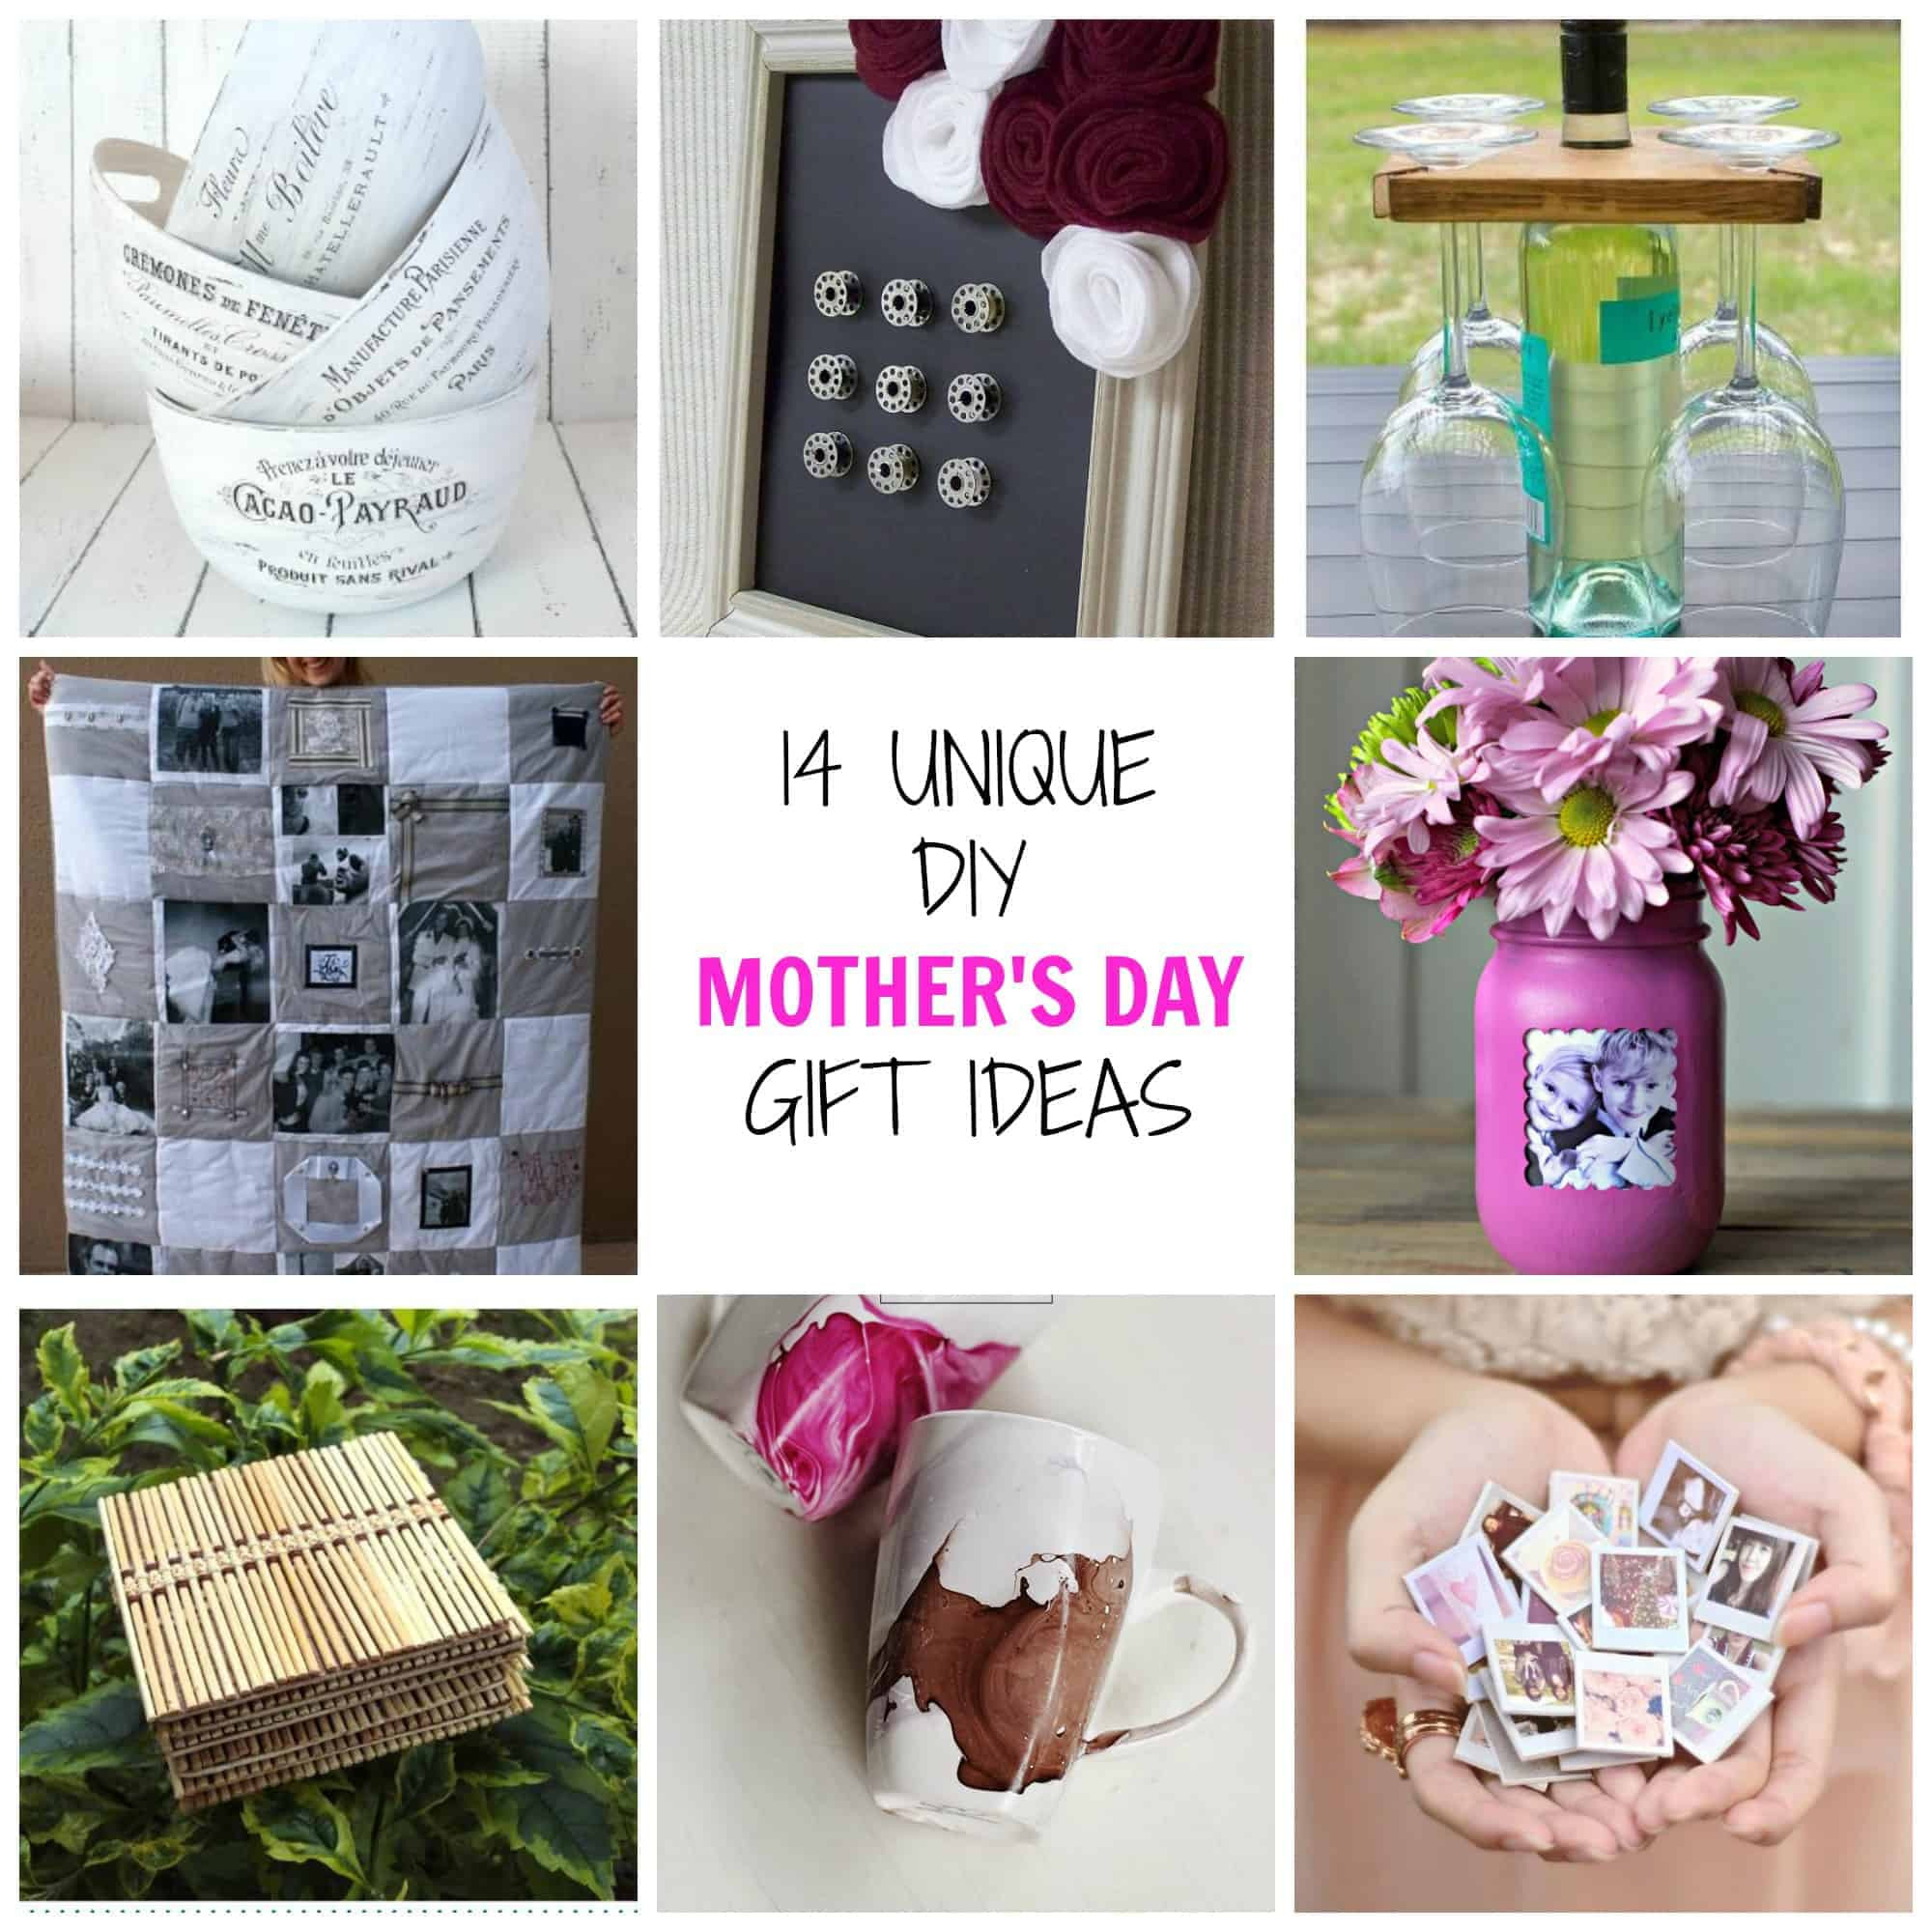 Mothersday Gift Ideas
 14 Unique DIY Mother s Day Gifts Simplify Create Inspire